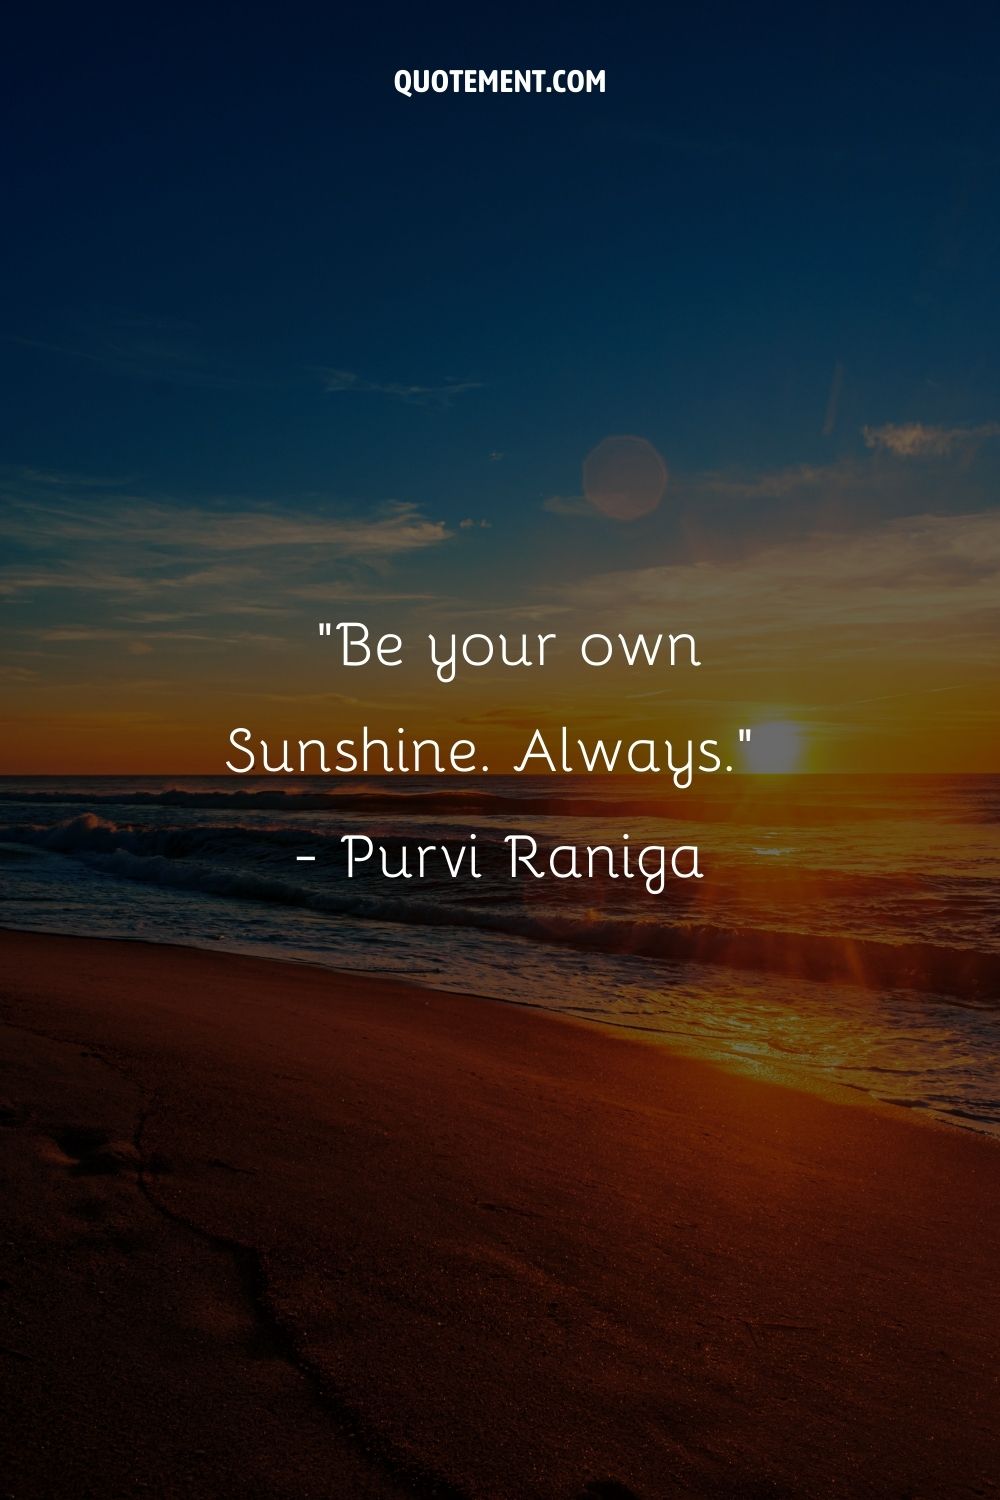 Be your own Sunshine. Always.